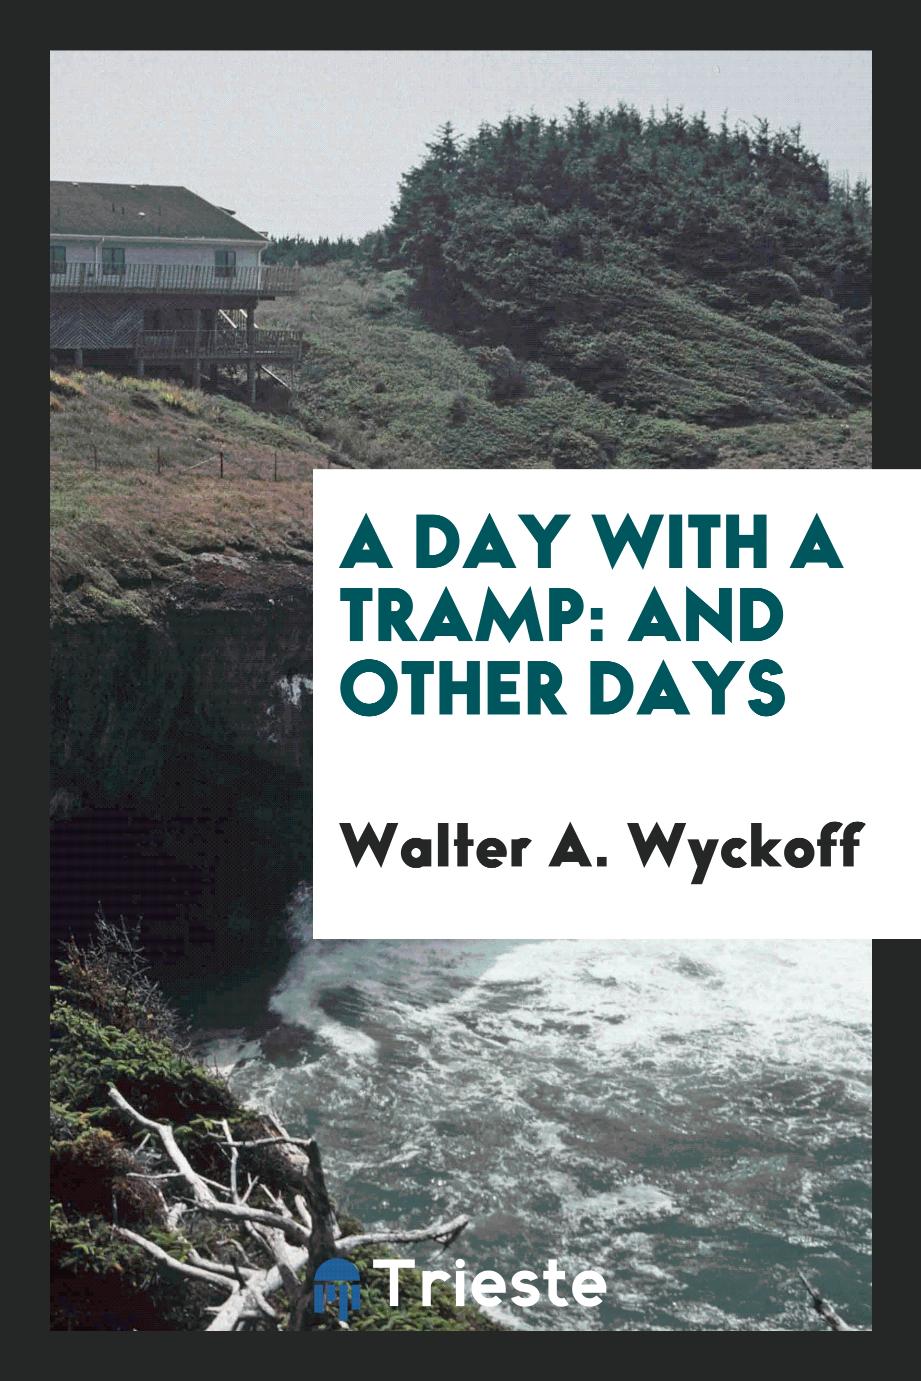 A Day with a Tramp: And Other Days